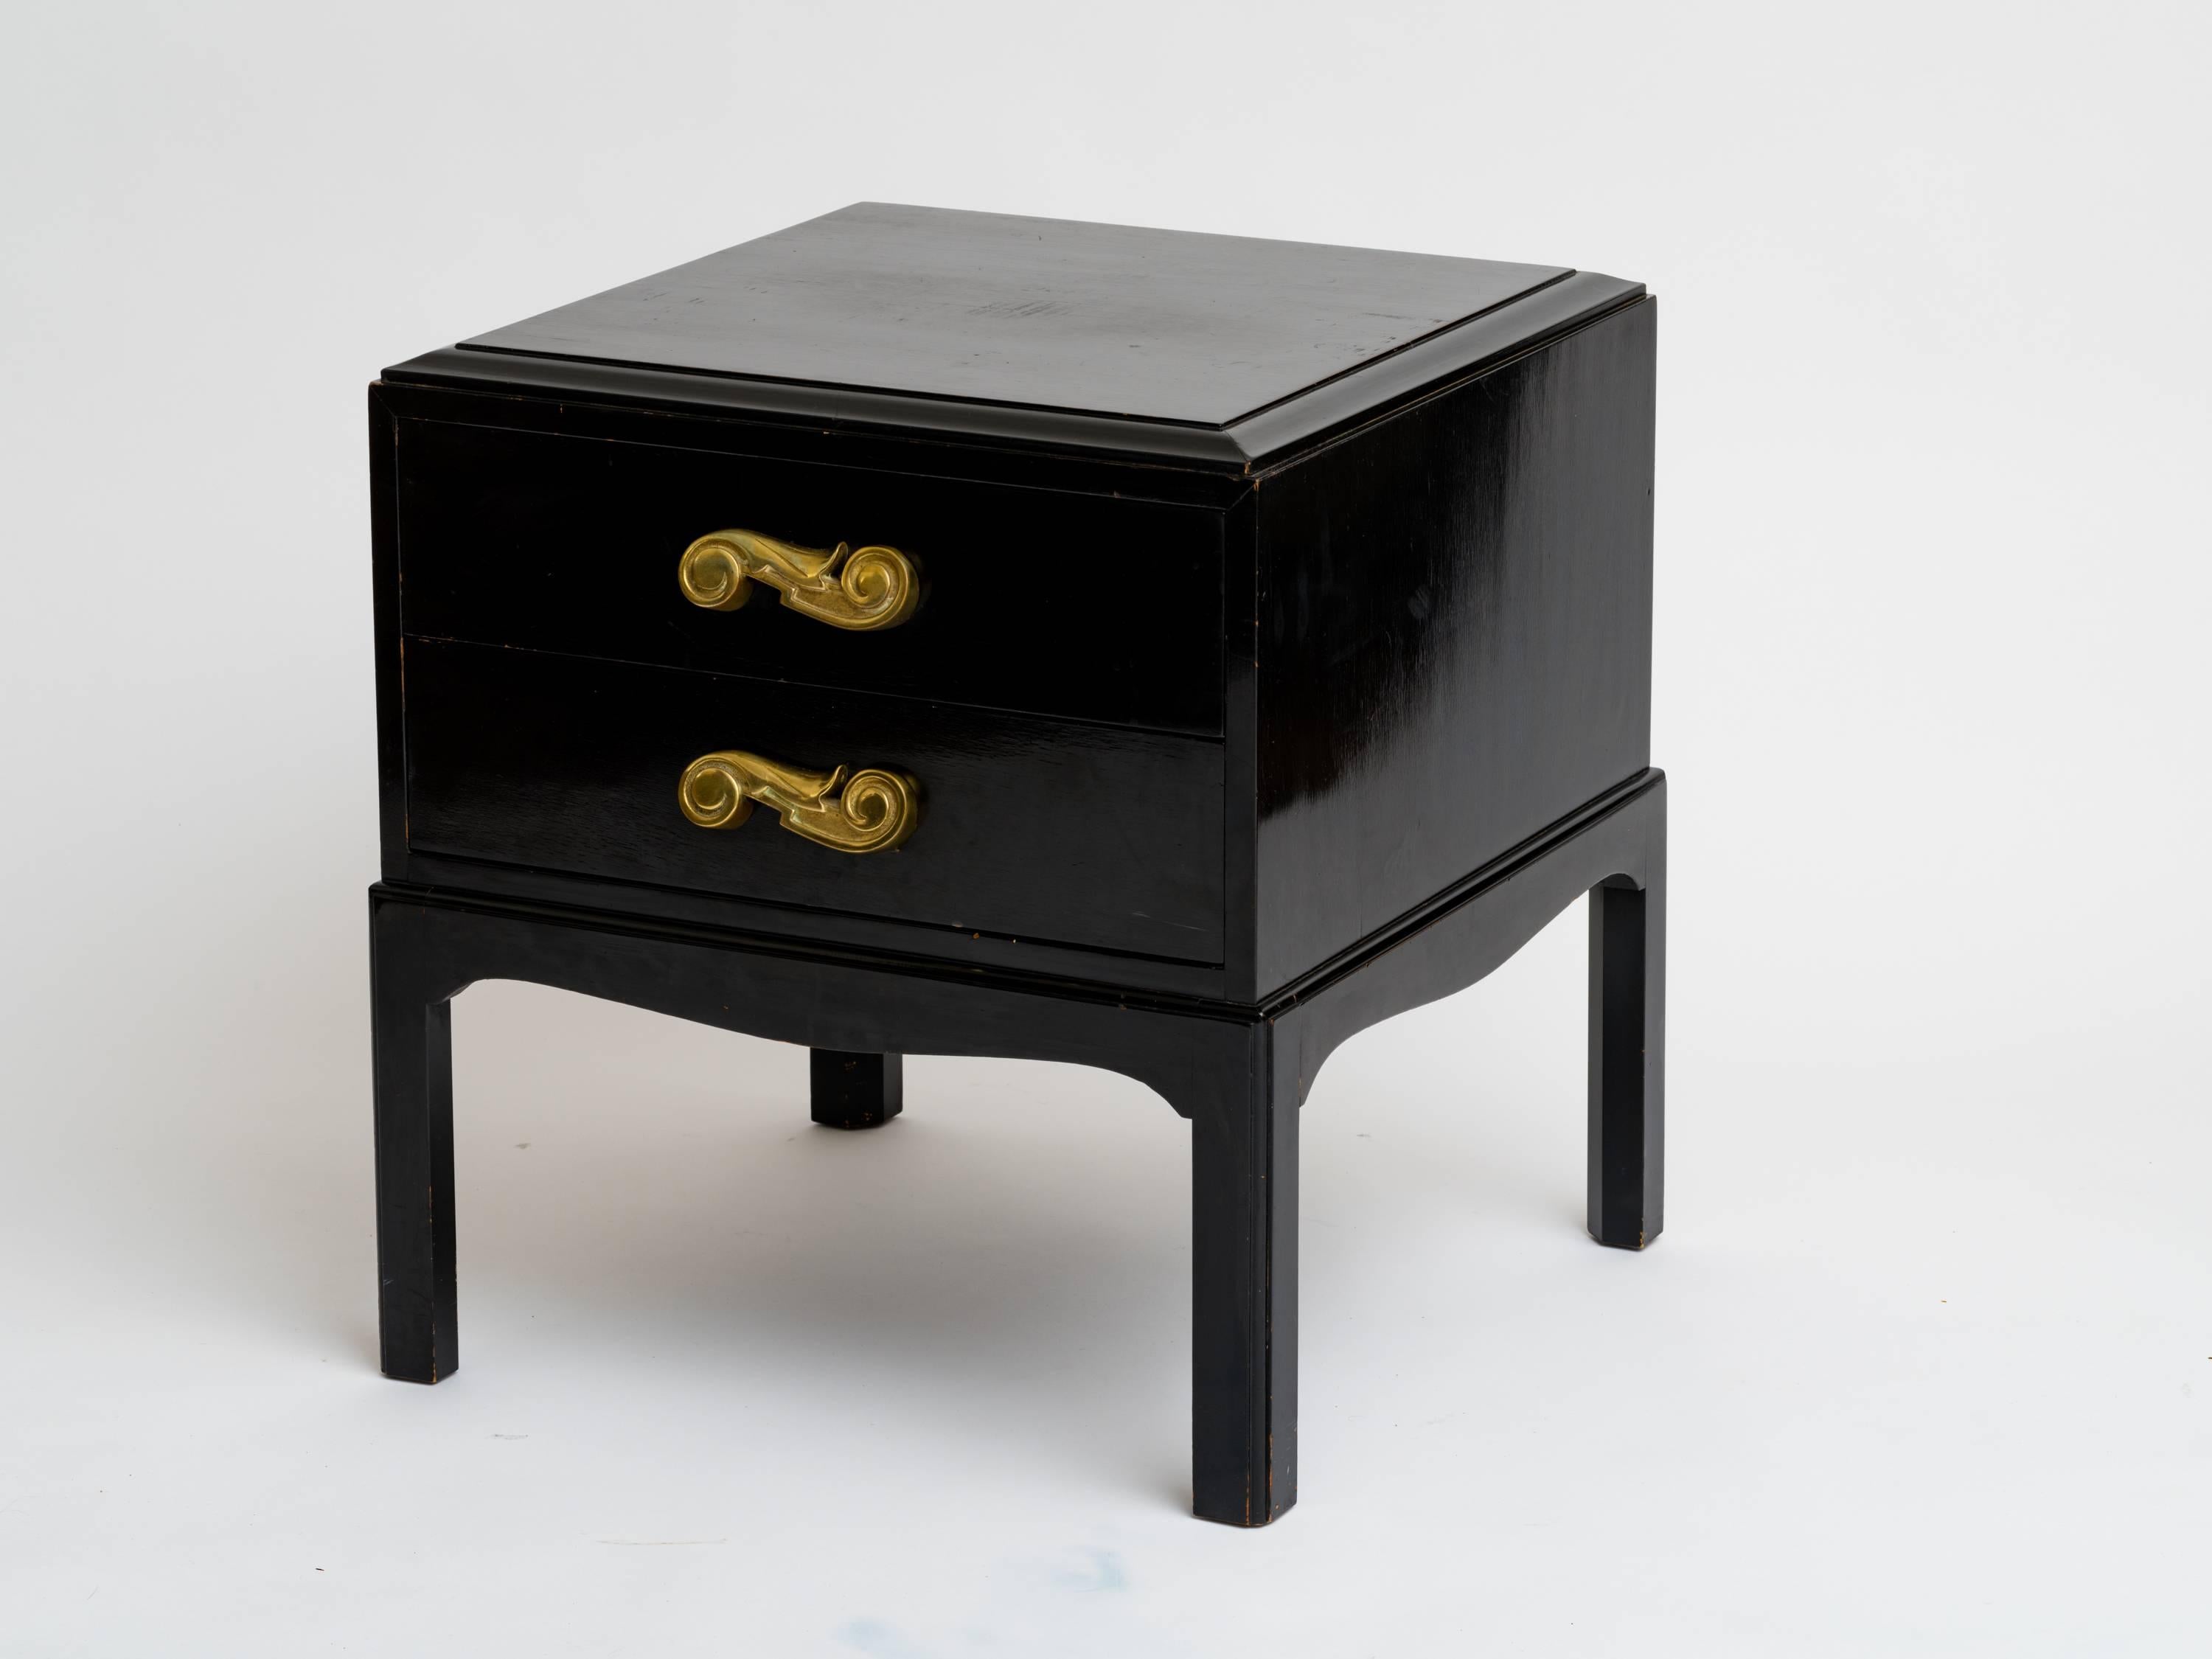 Stunning pair of Hollywood Regency ebonized end tables with bronze scroll drawer pulls. They stand on curved platform bases. Dated inside the wood frame, January 1949.